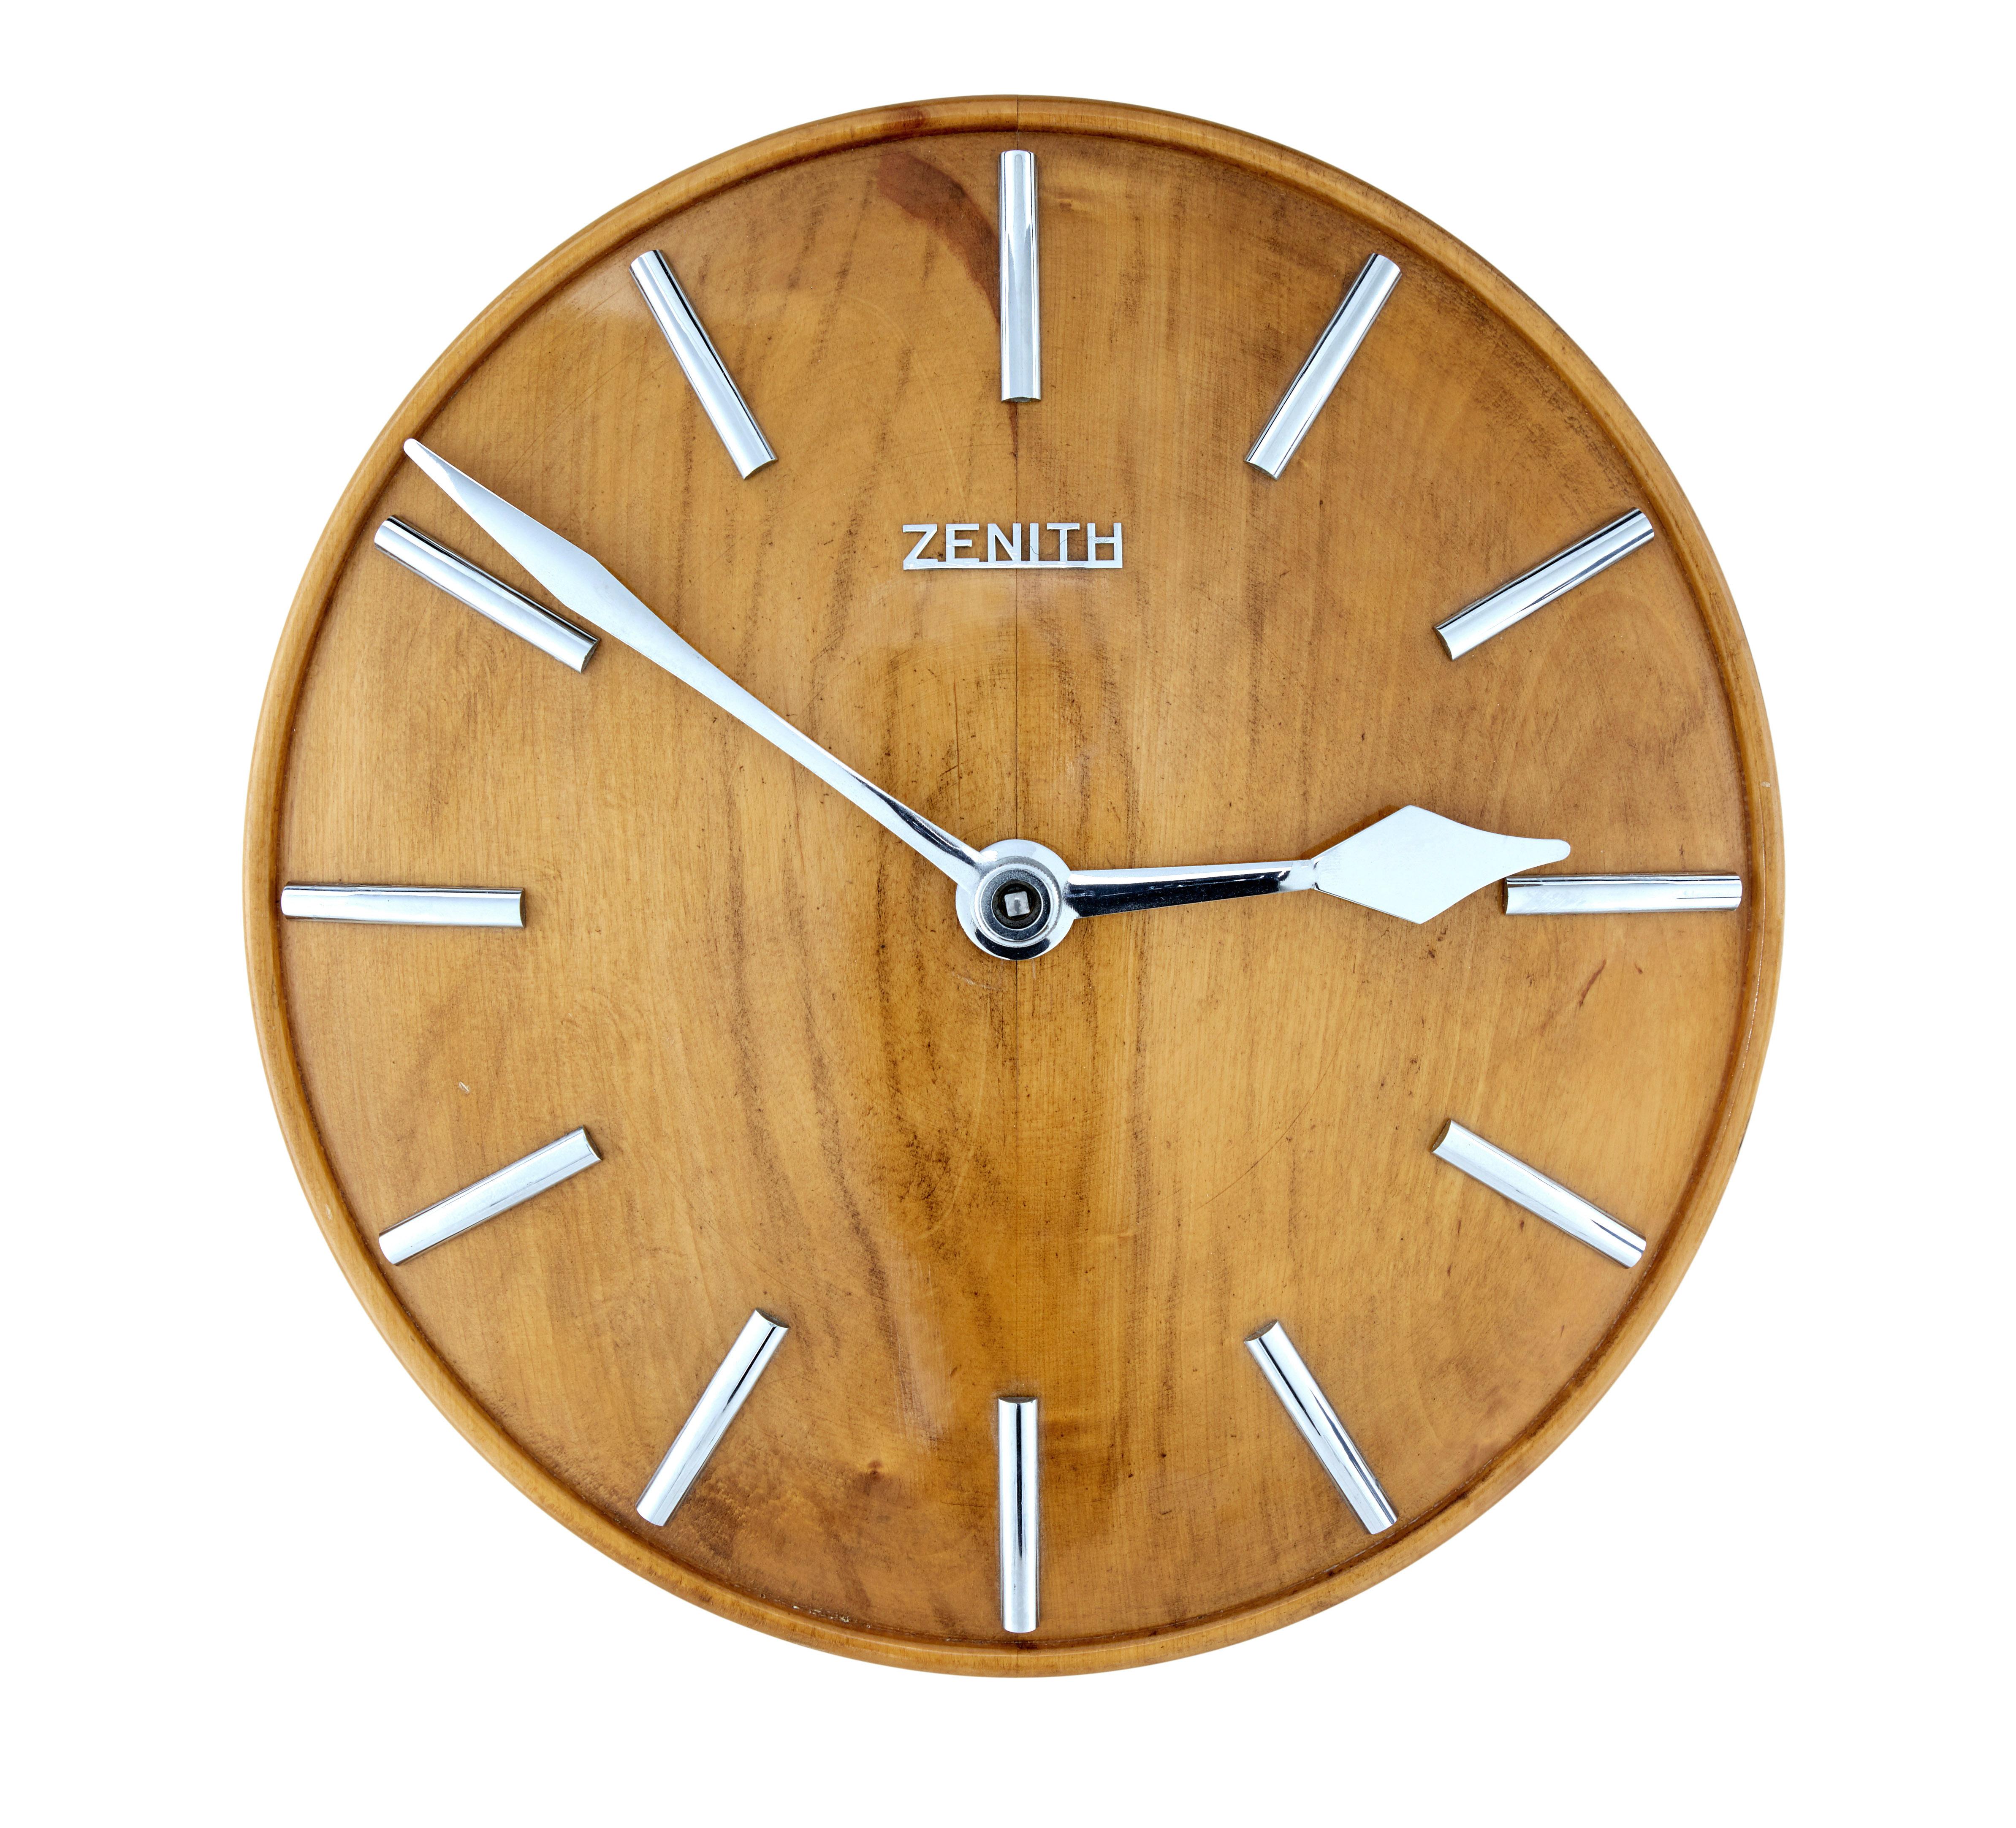 Mid-century zenith oak wall clock, circa 1940 - 1950.

Fine example of a convex shaped wall clock, by the well known maker zenith.  Popular for retailing out of heals of London during the 1930's.

This example has silvered hands and marks to